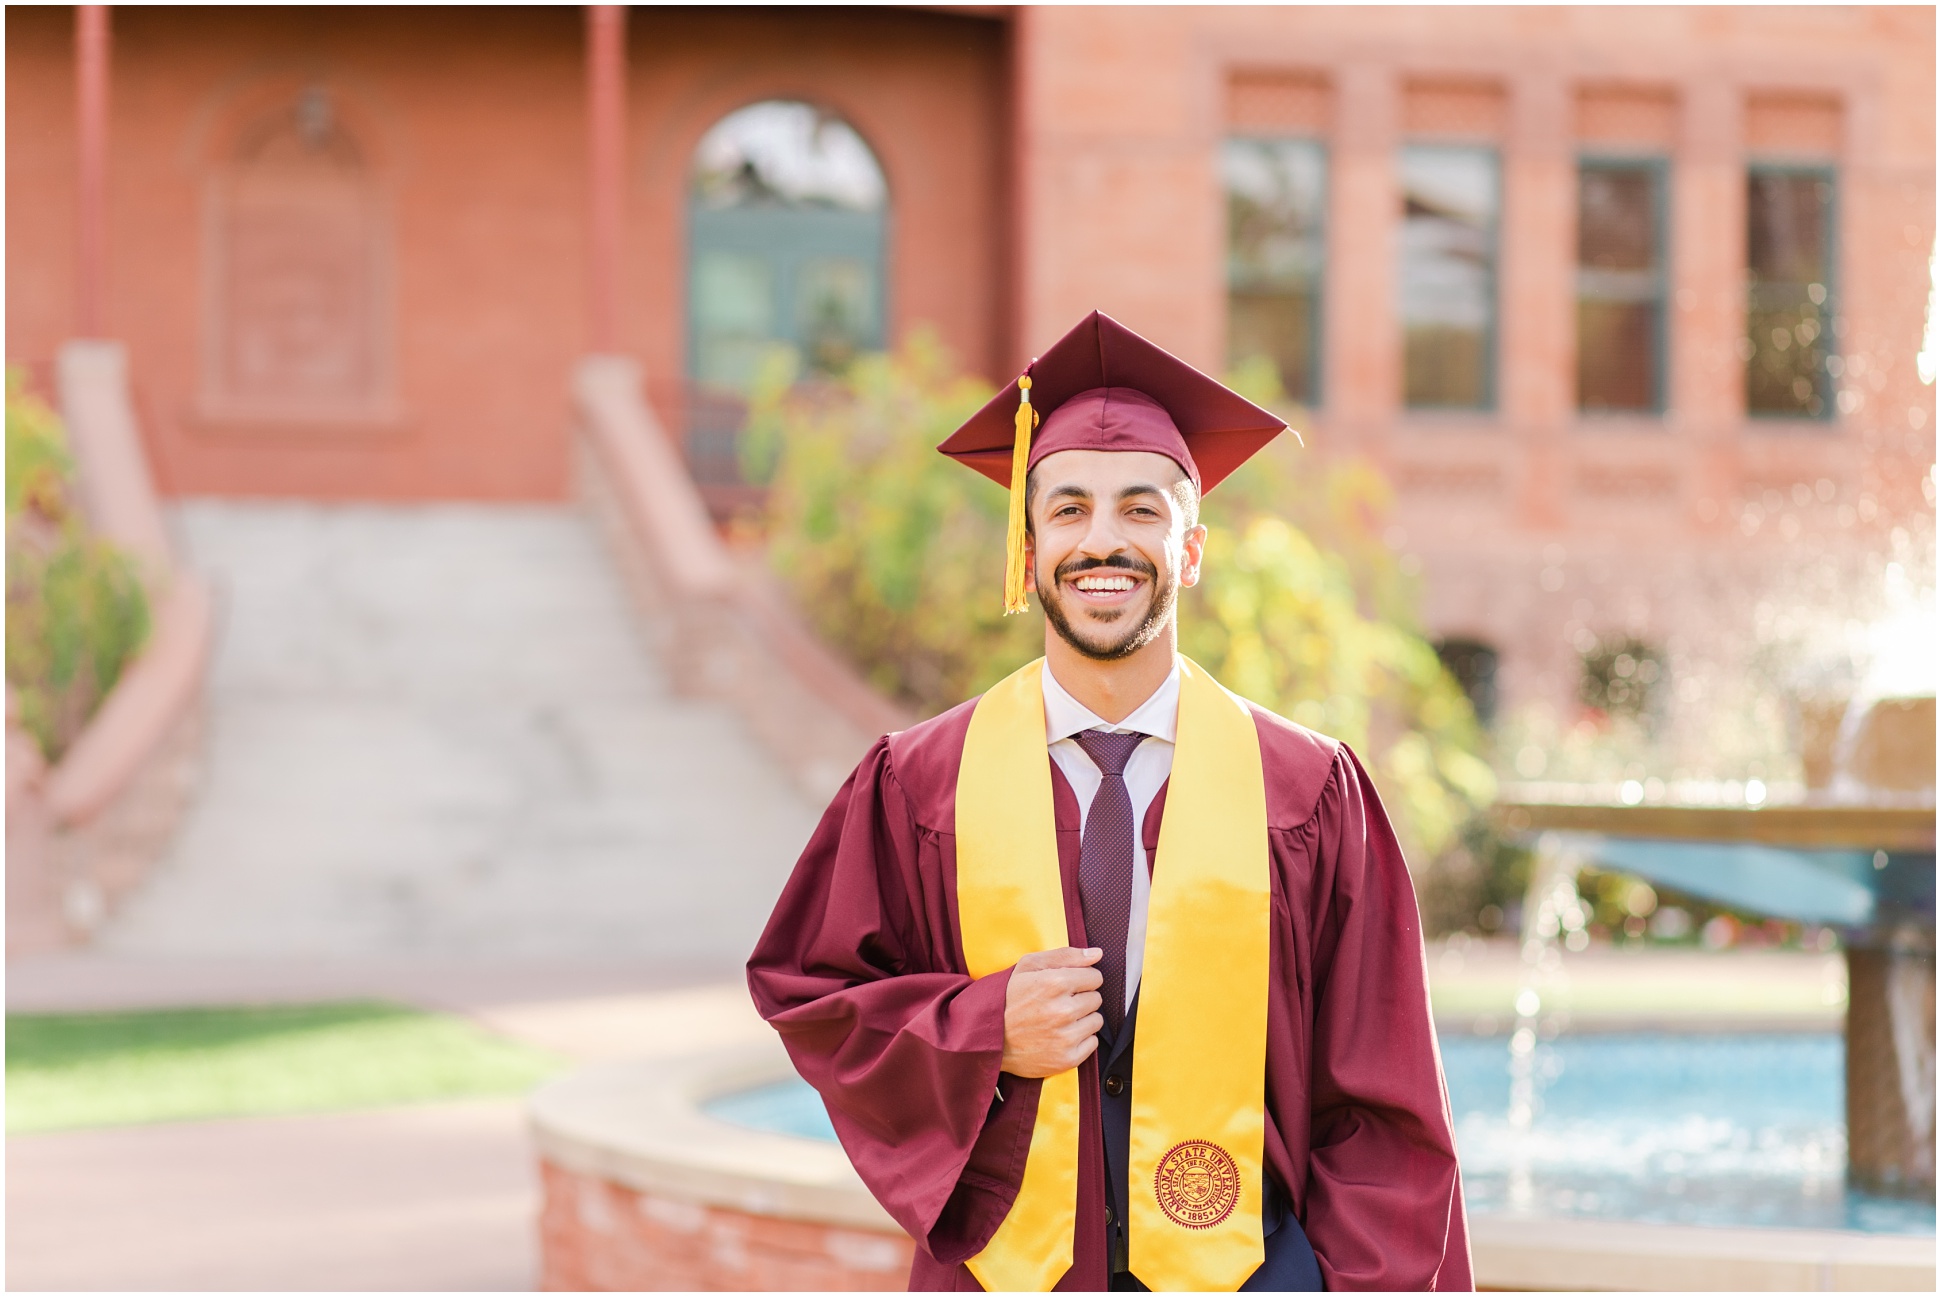 ASU graduate holding academic stole and smiling at camera